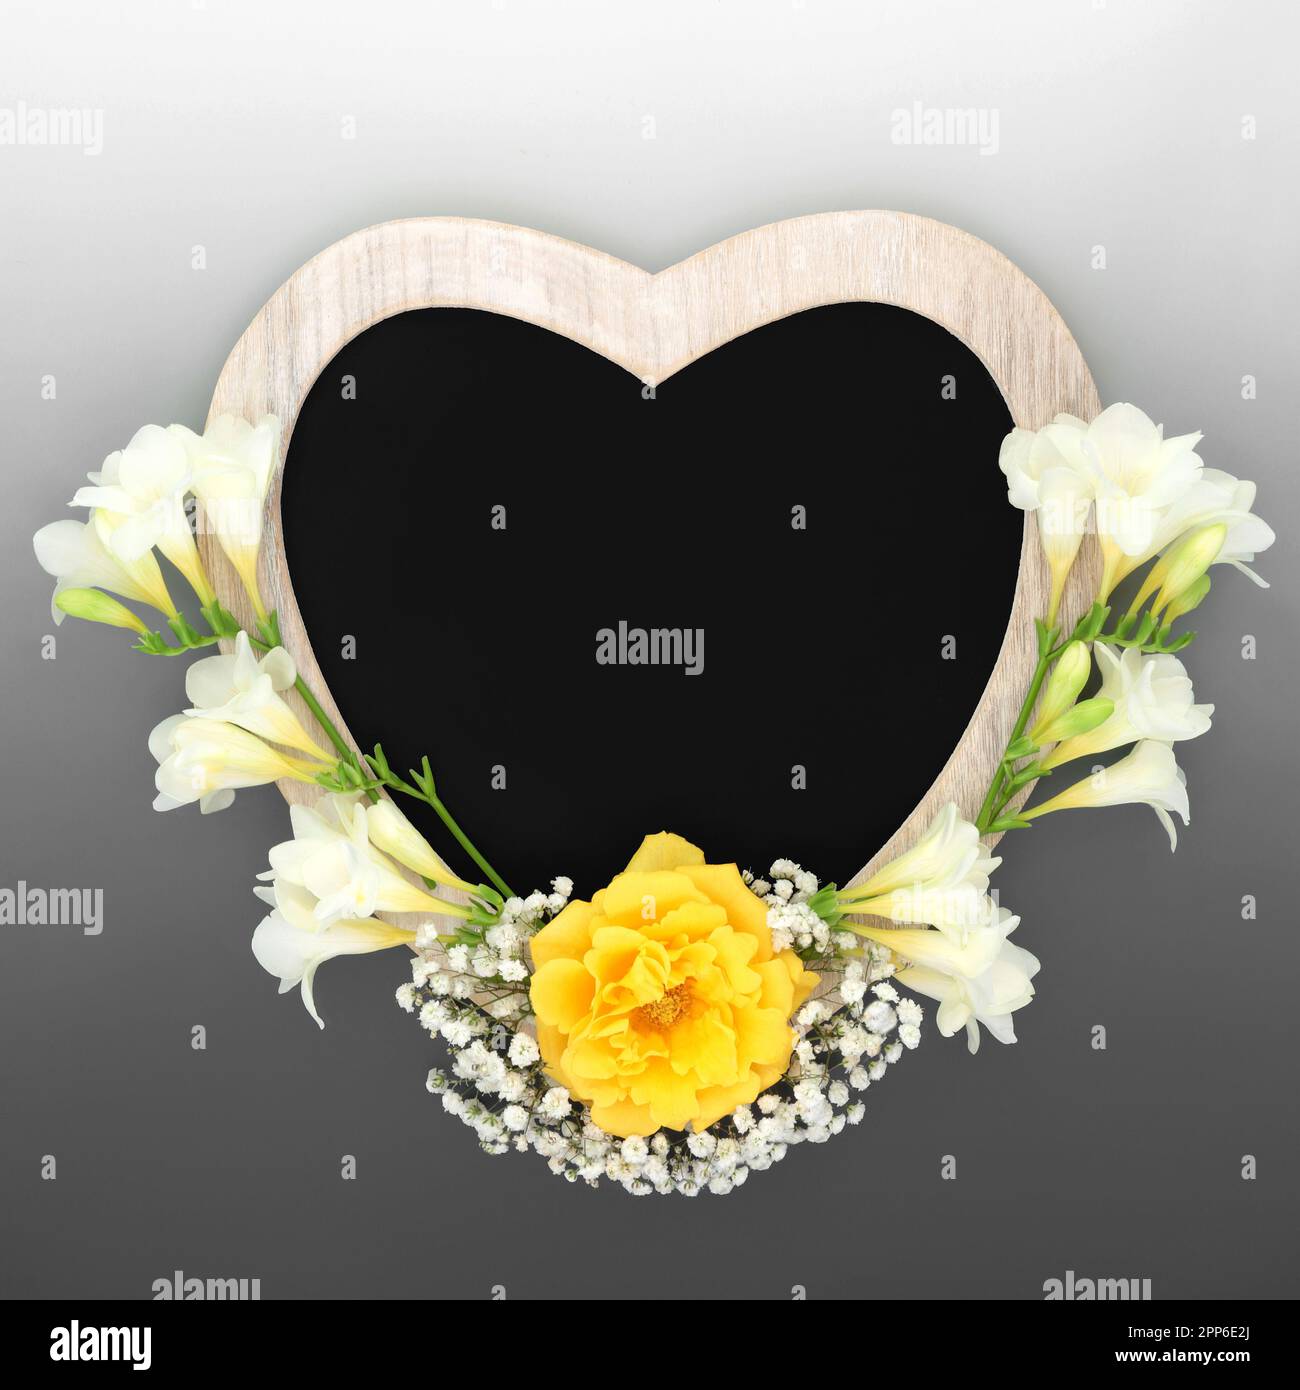 Heart shaped rustic wooden frame with chalkboard and flowers. Suitable for In Memoriam card, funeral invitation, mourning, RIP concept. Stock Photo